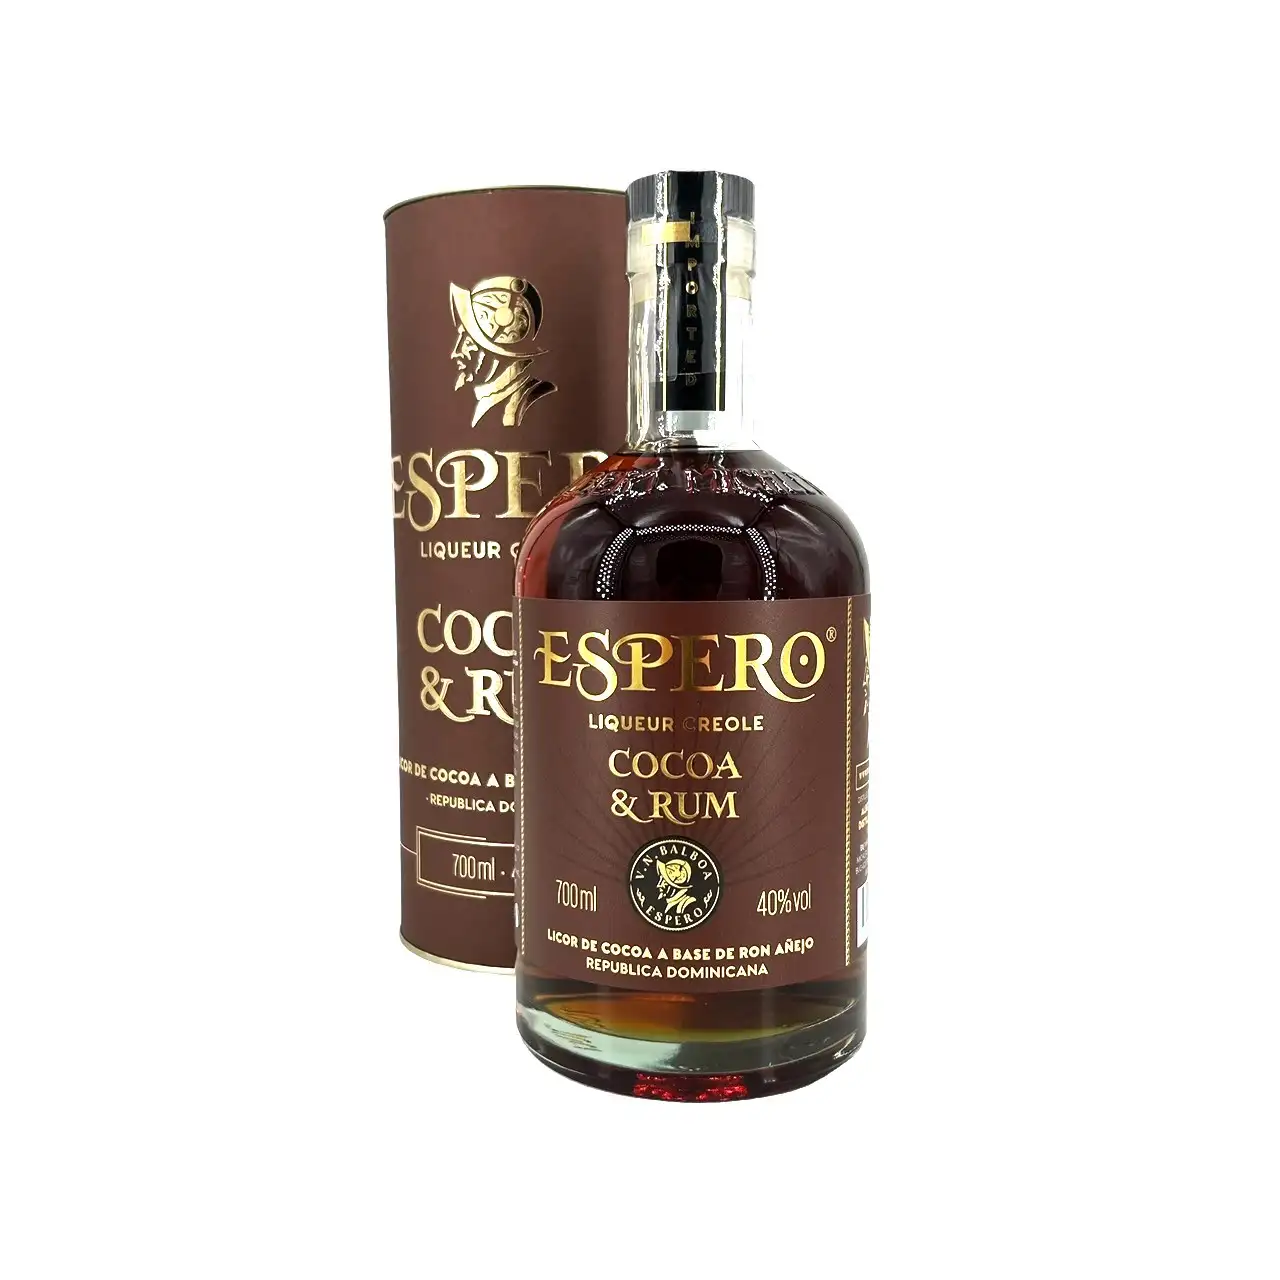 Image of the front of the bottle of the rum Ron Espero Cocoa & Rum Liqueur Creole